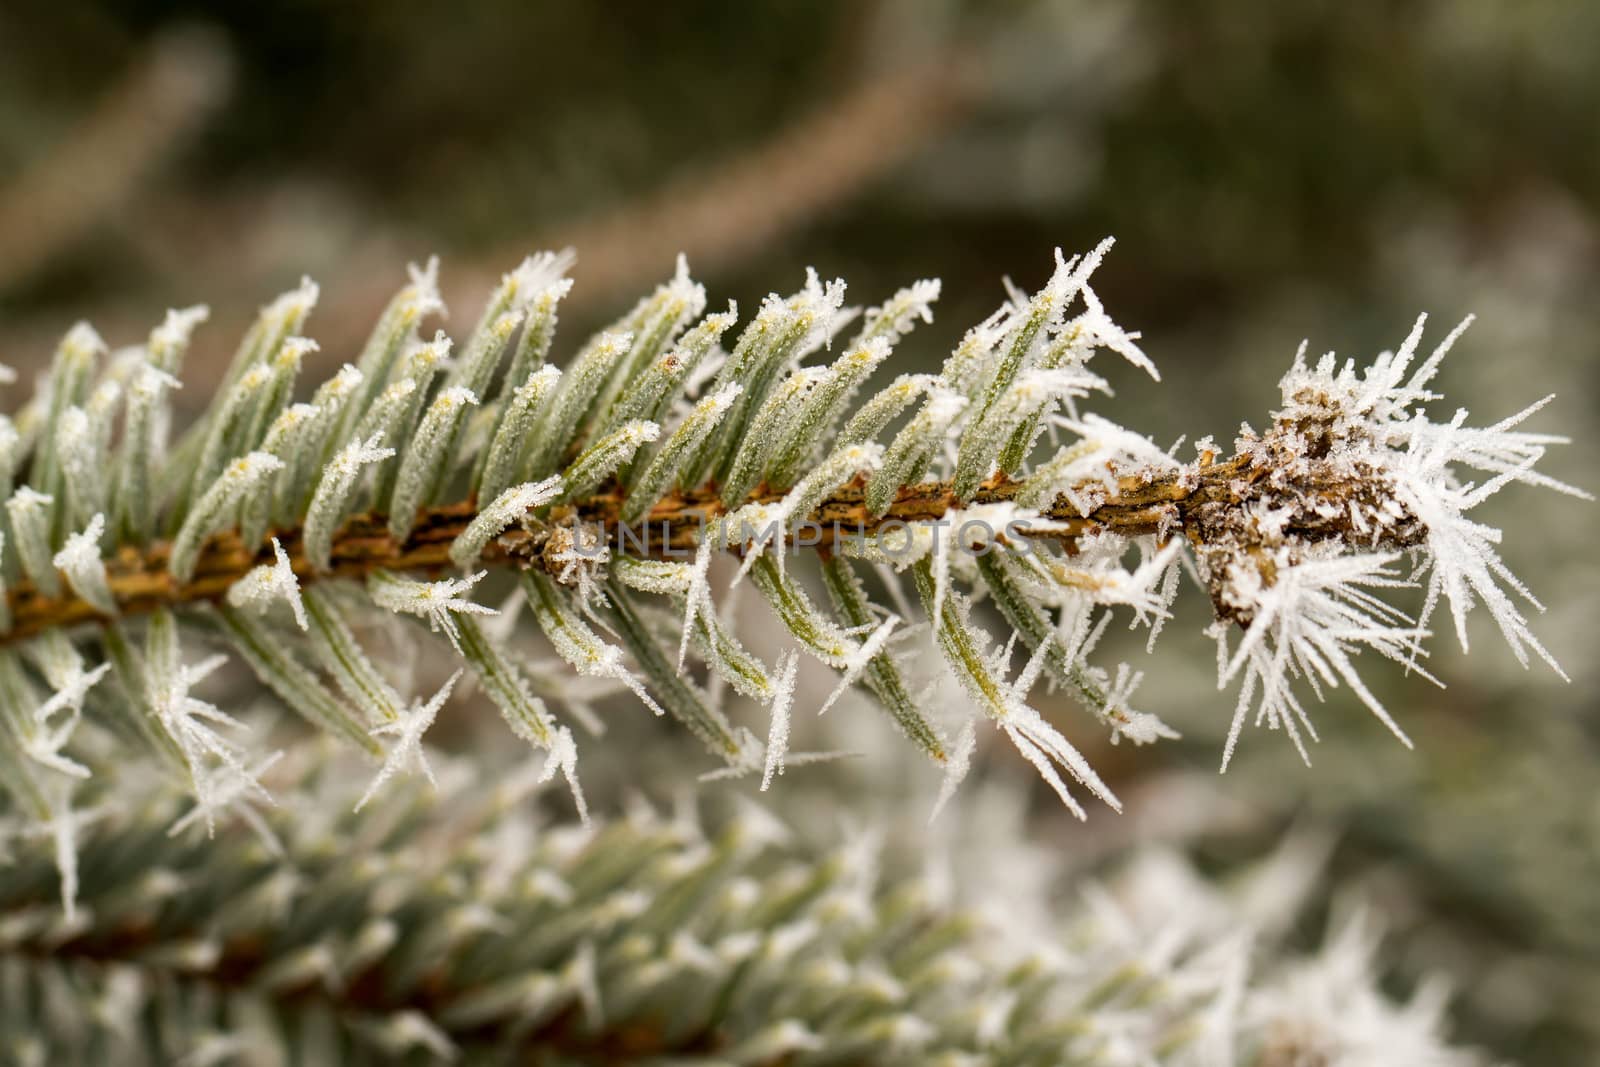 rime or hoarfrost on a silver pine branch